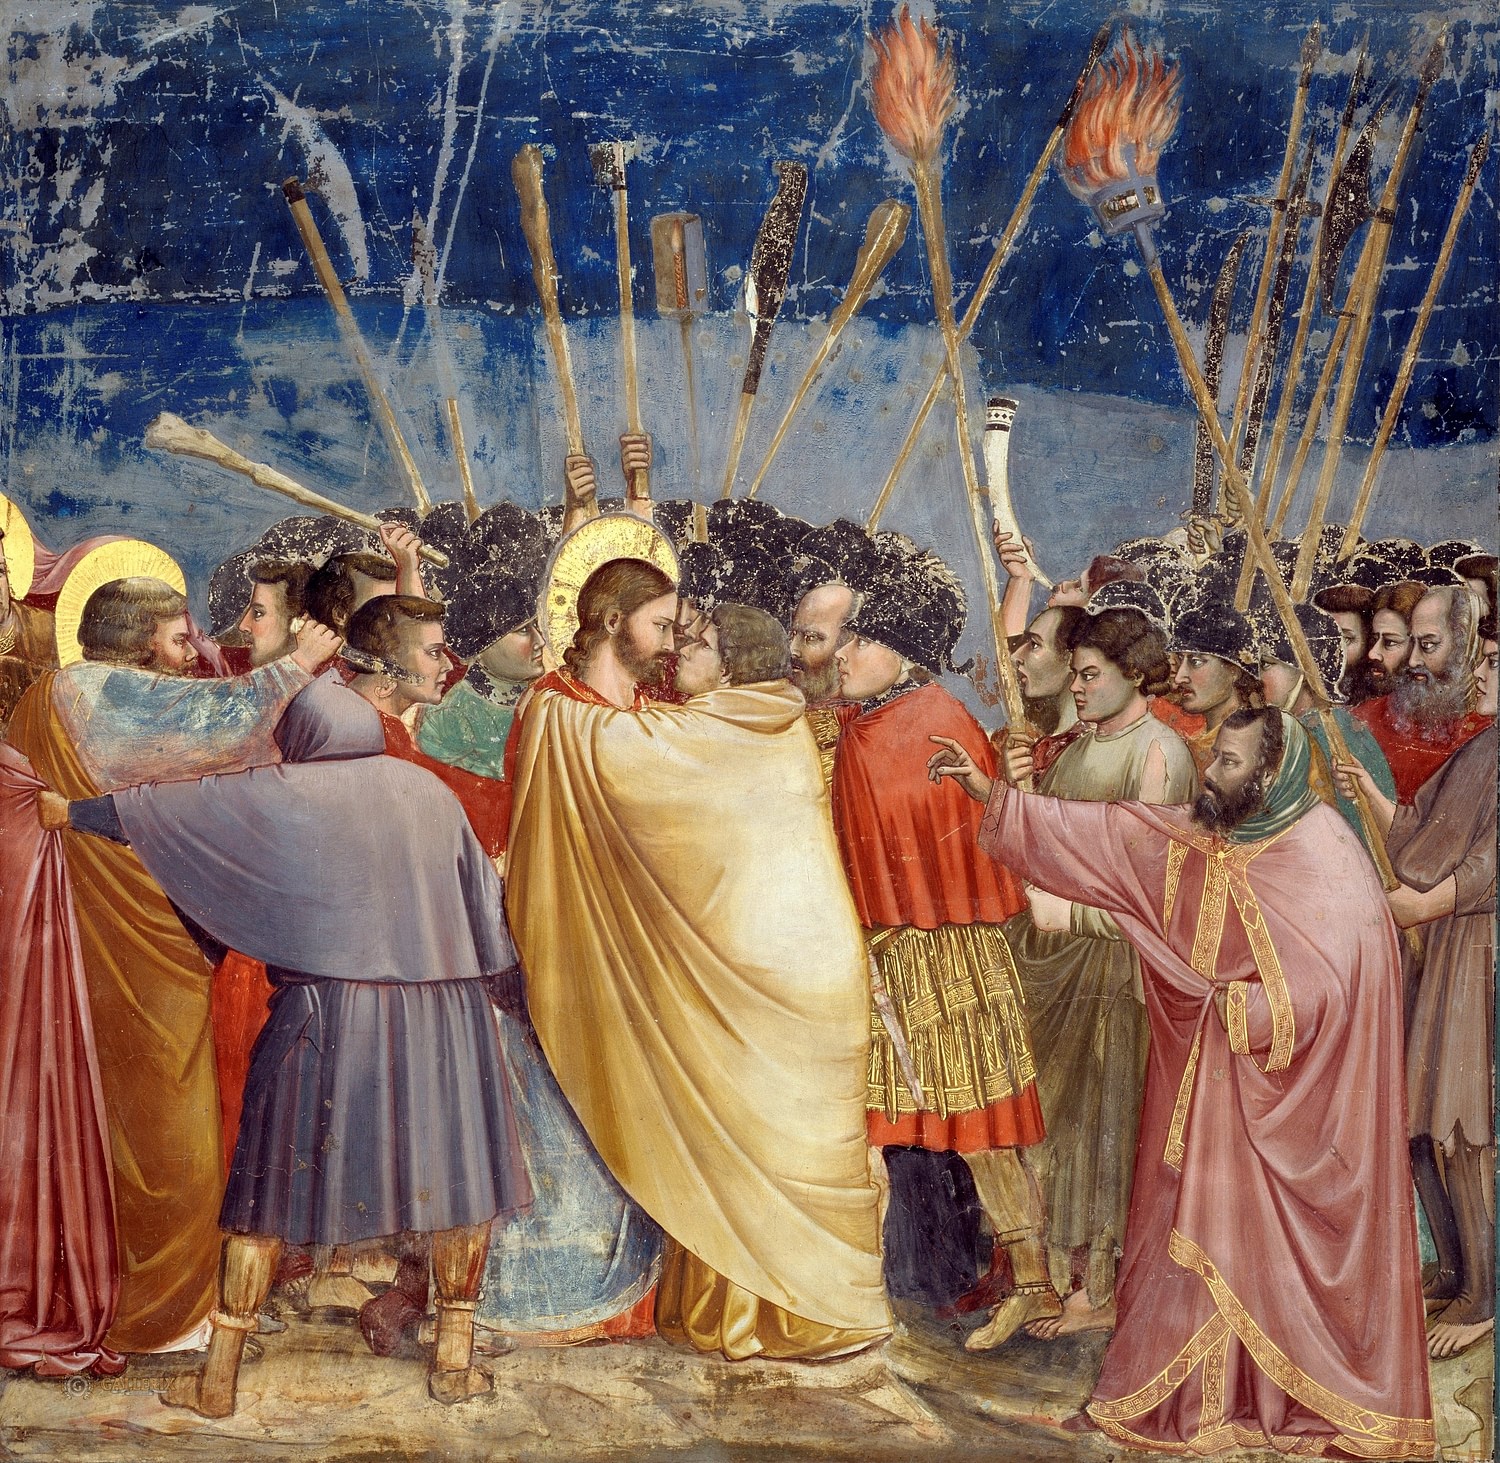 Giotto, life and works of the artist who remolded the art of painting